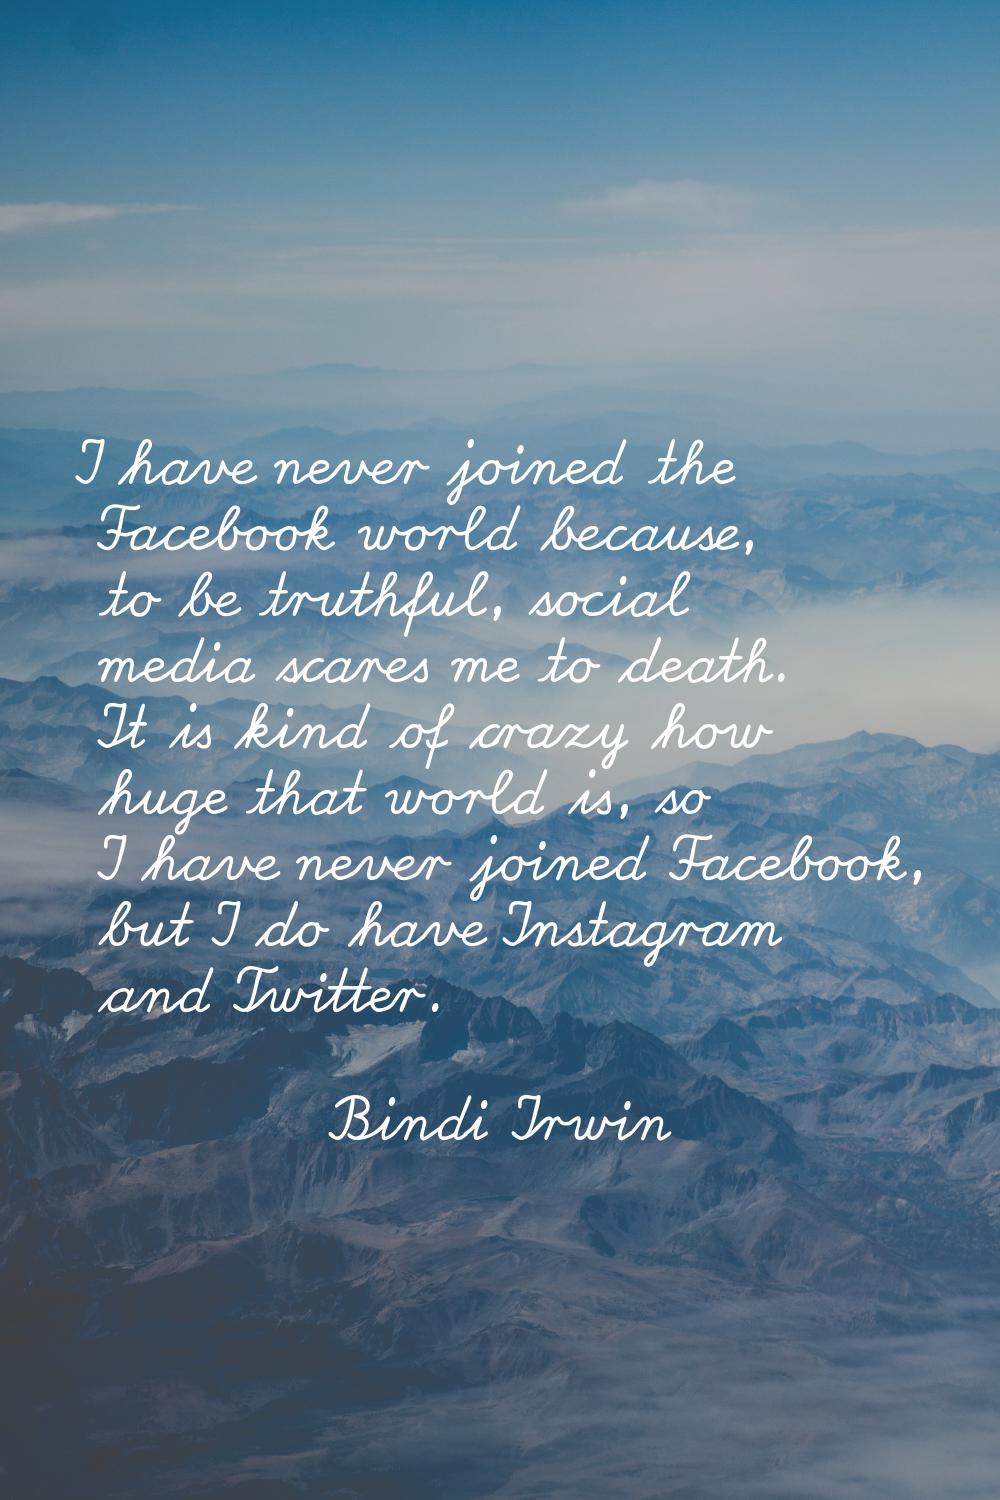 I have never joined the Facebook world because, to be truthful, social media scares me to death. It